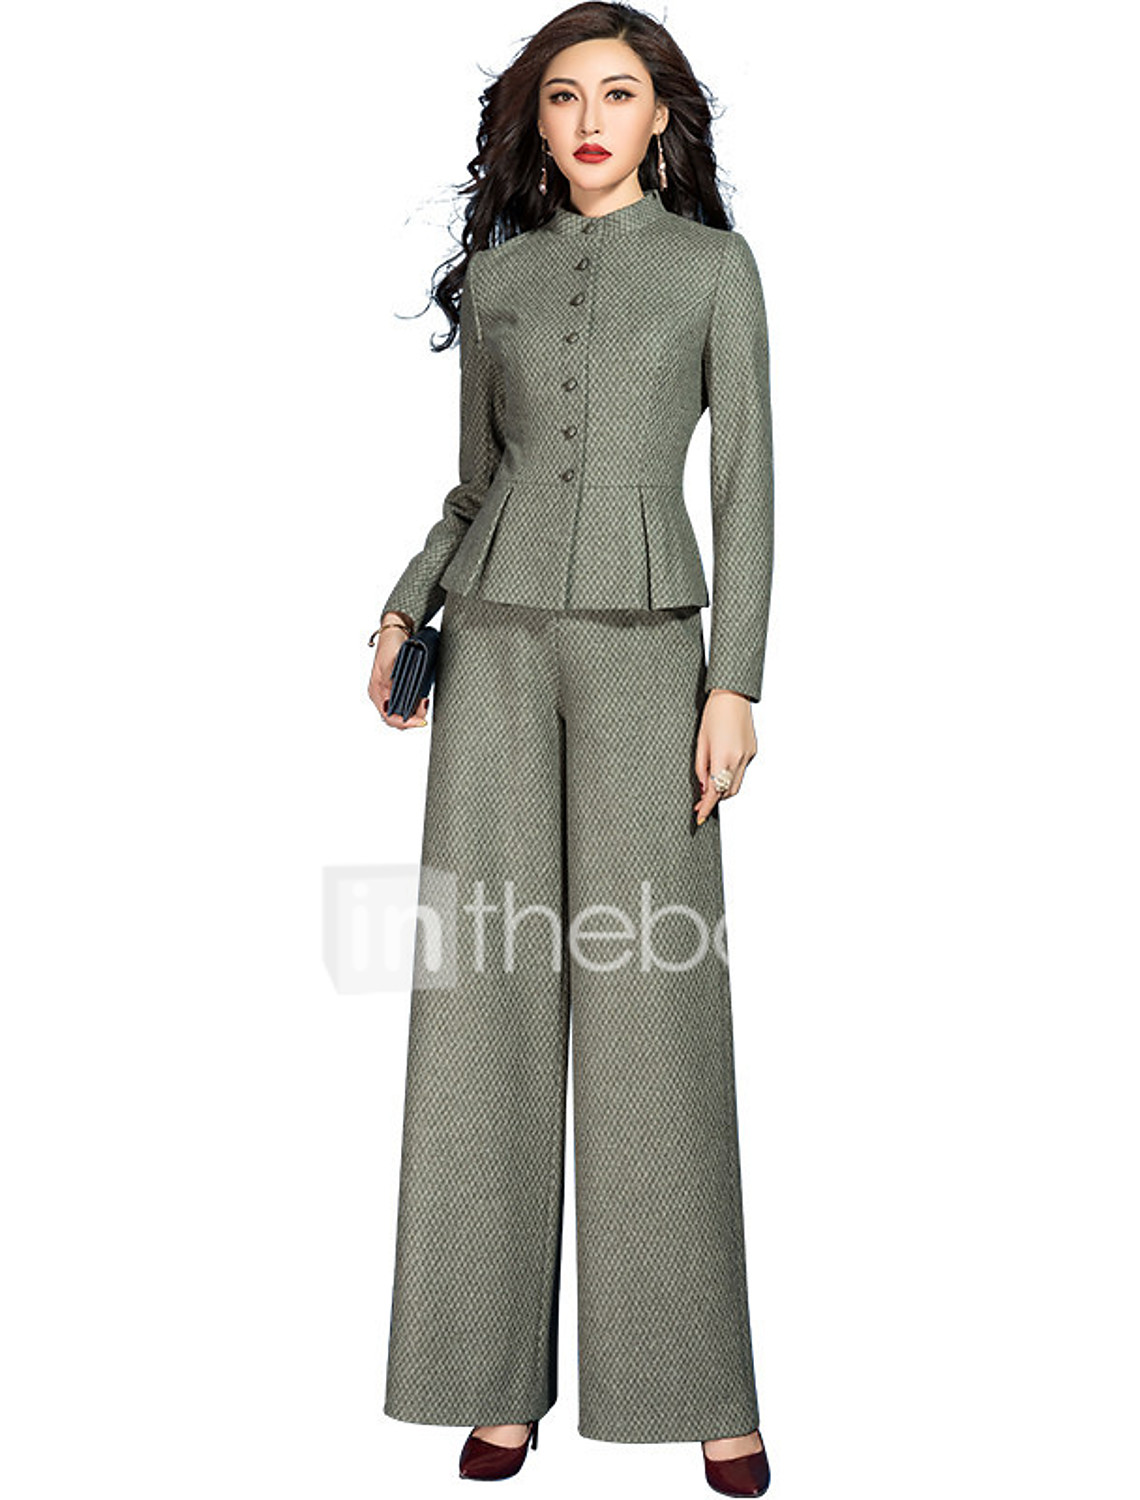 great gatsby pants outfits female